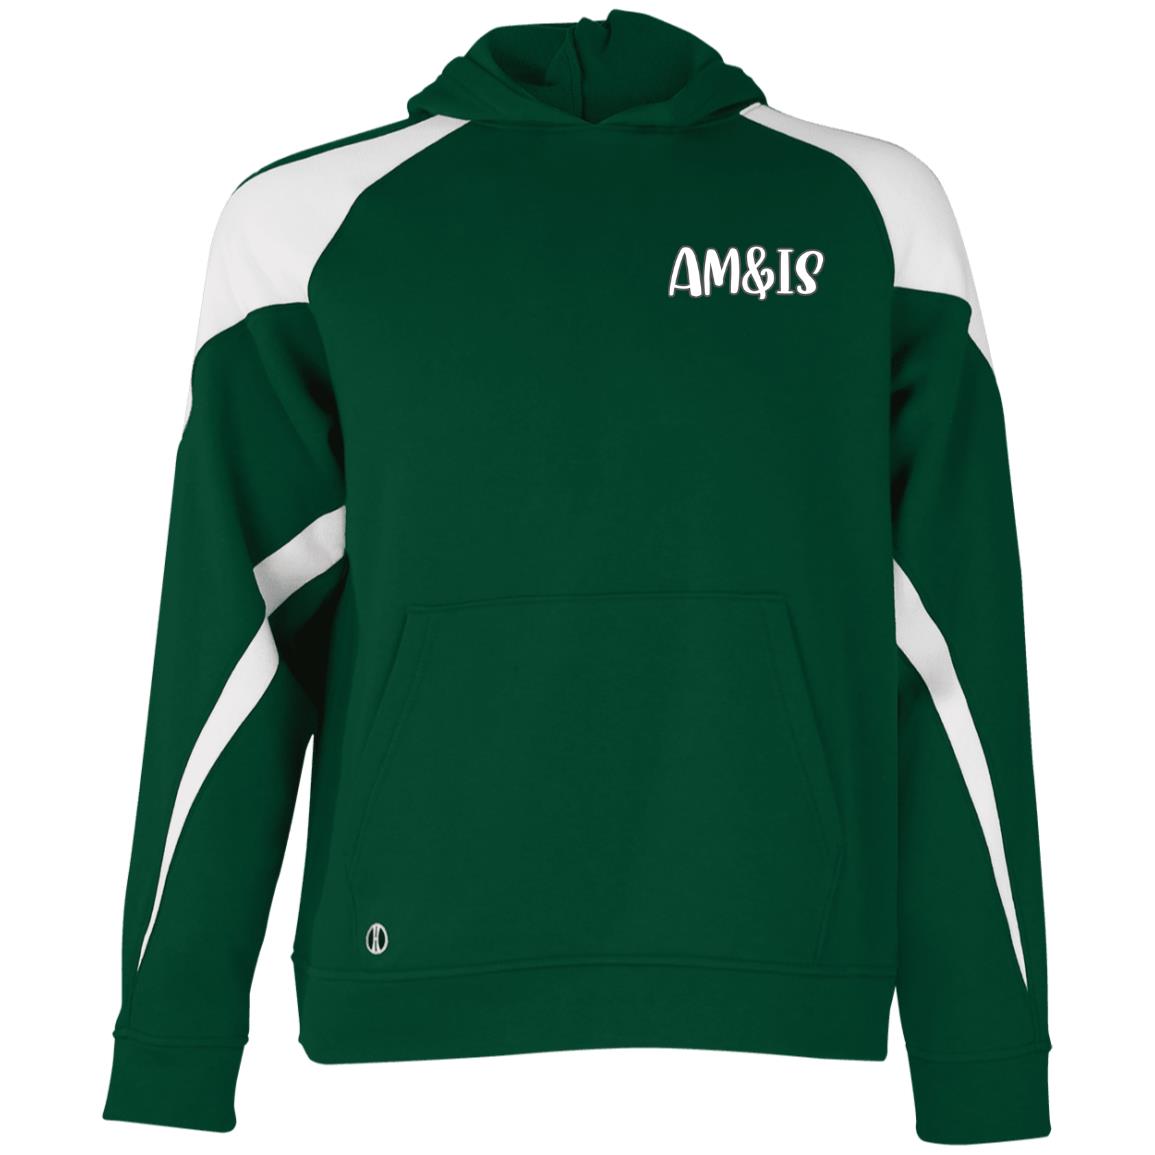 FOREST WHITE - AM&IS Activewear Youth Athletic Colorblock Fleece Hoodie - kids hoodie at TFC&H Co.